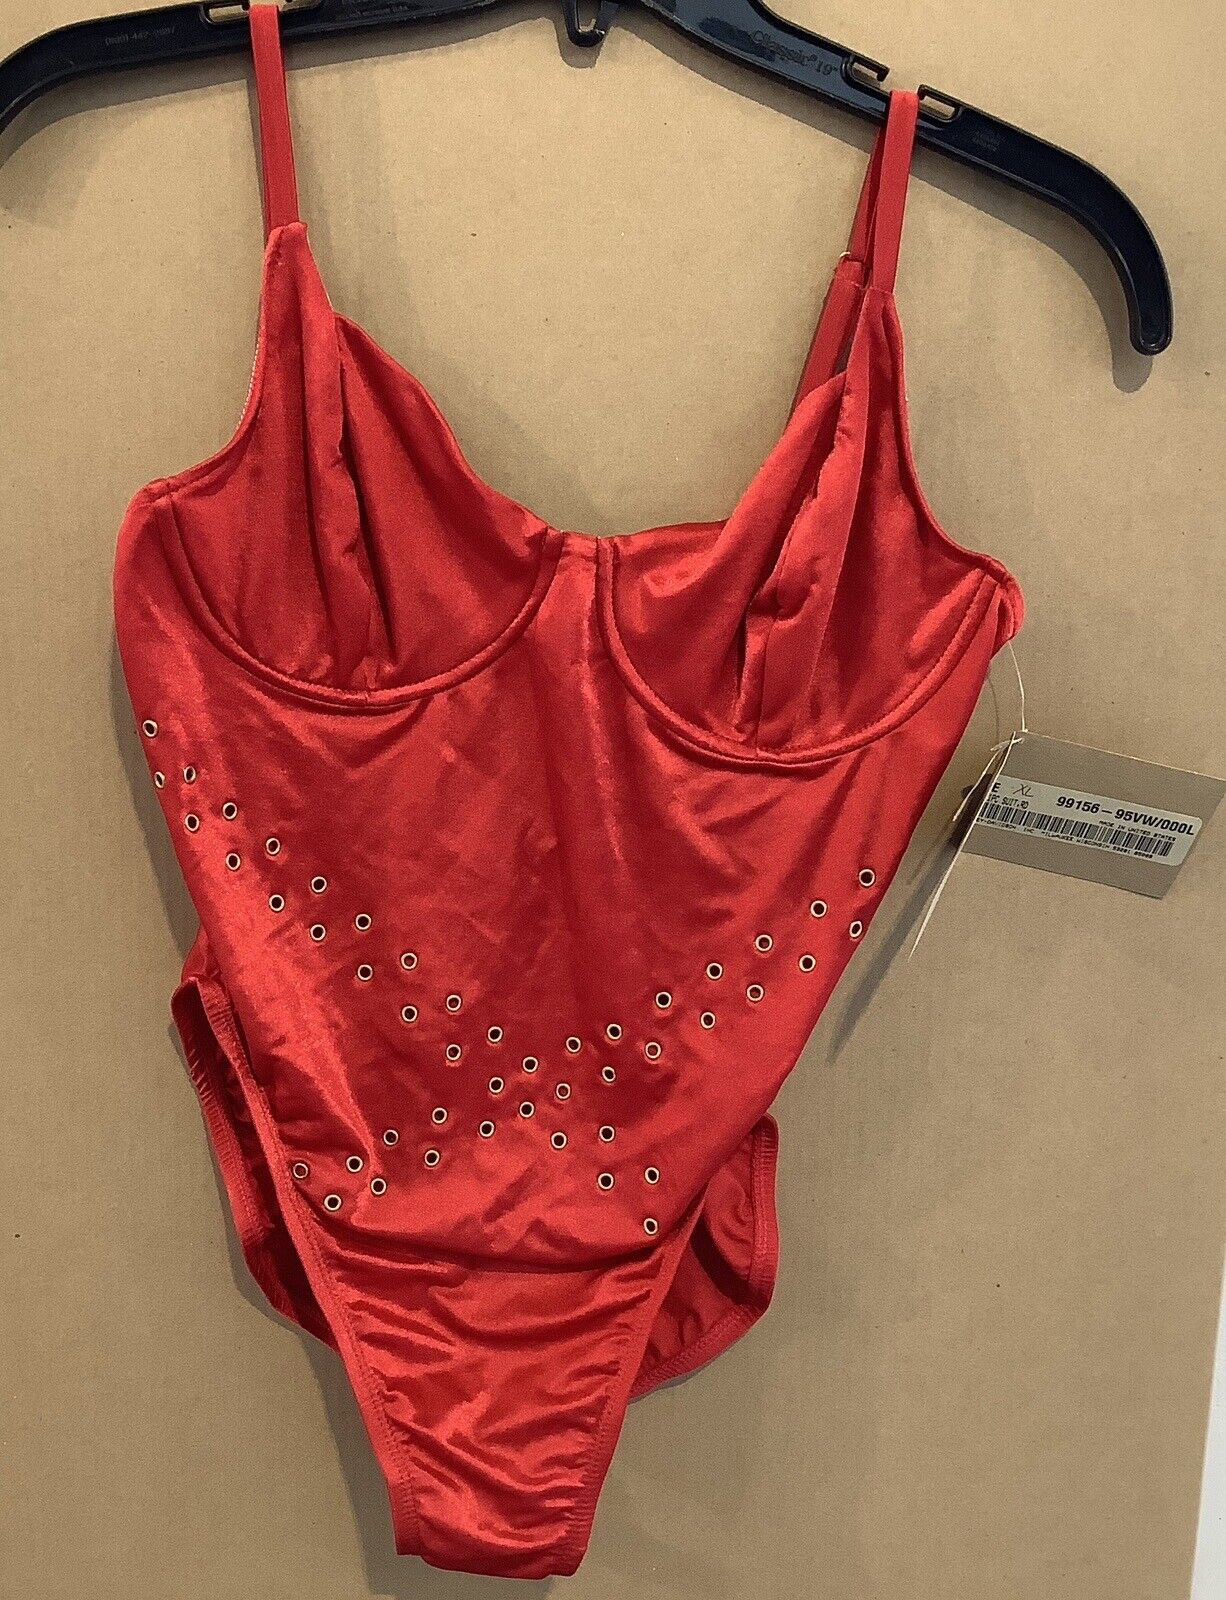 Harley-Davidson XL Bathing Suit women\'s one piece RED  NEW NOS 99156-95VW SALE